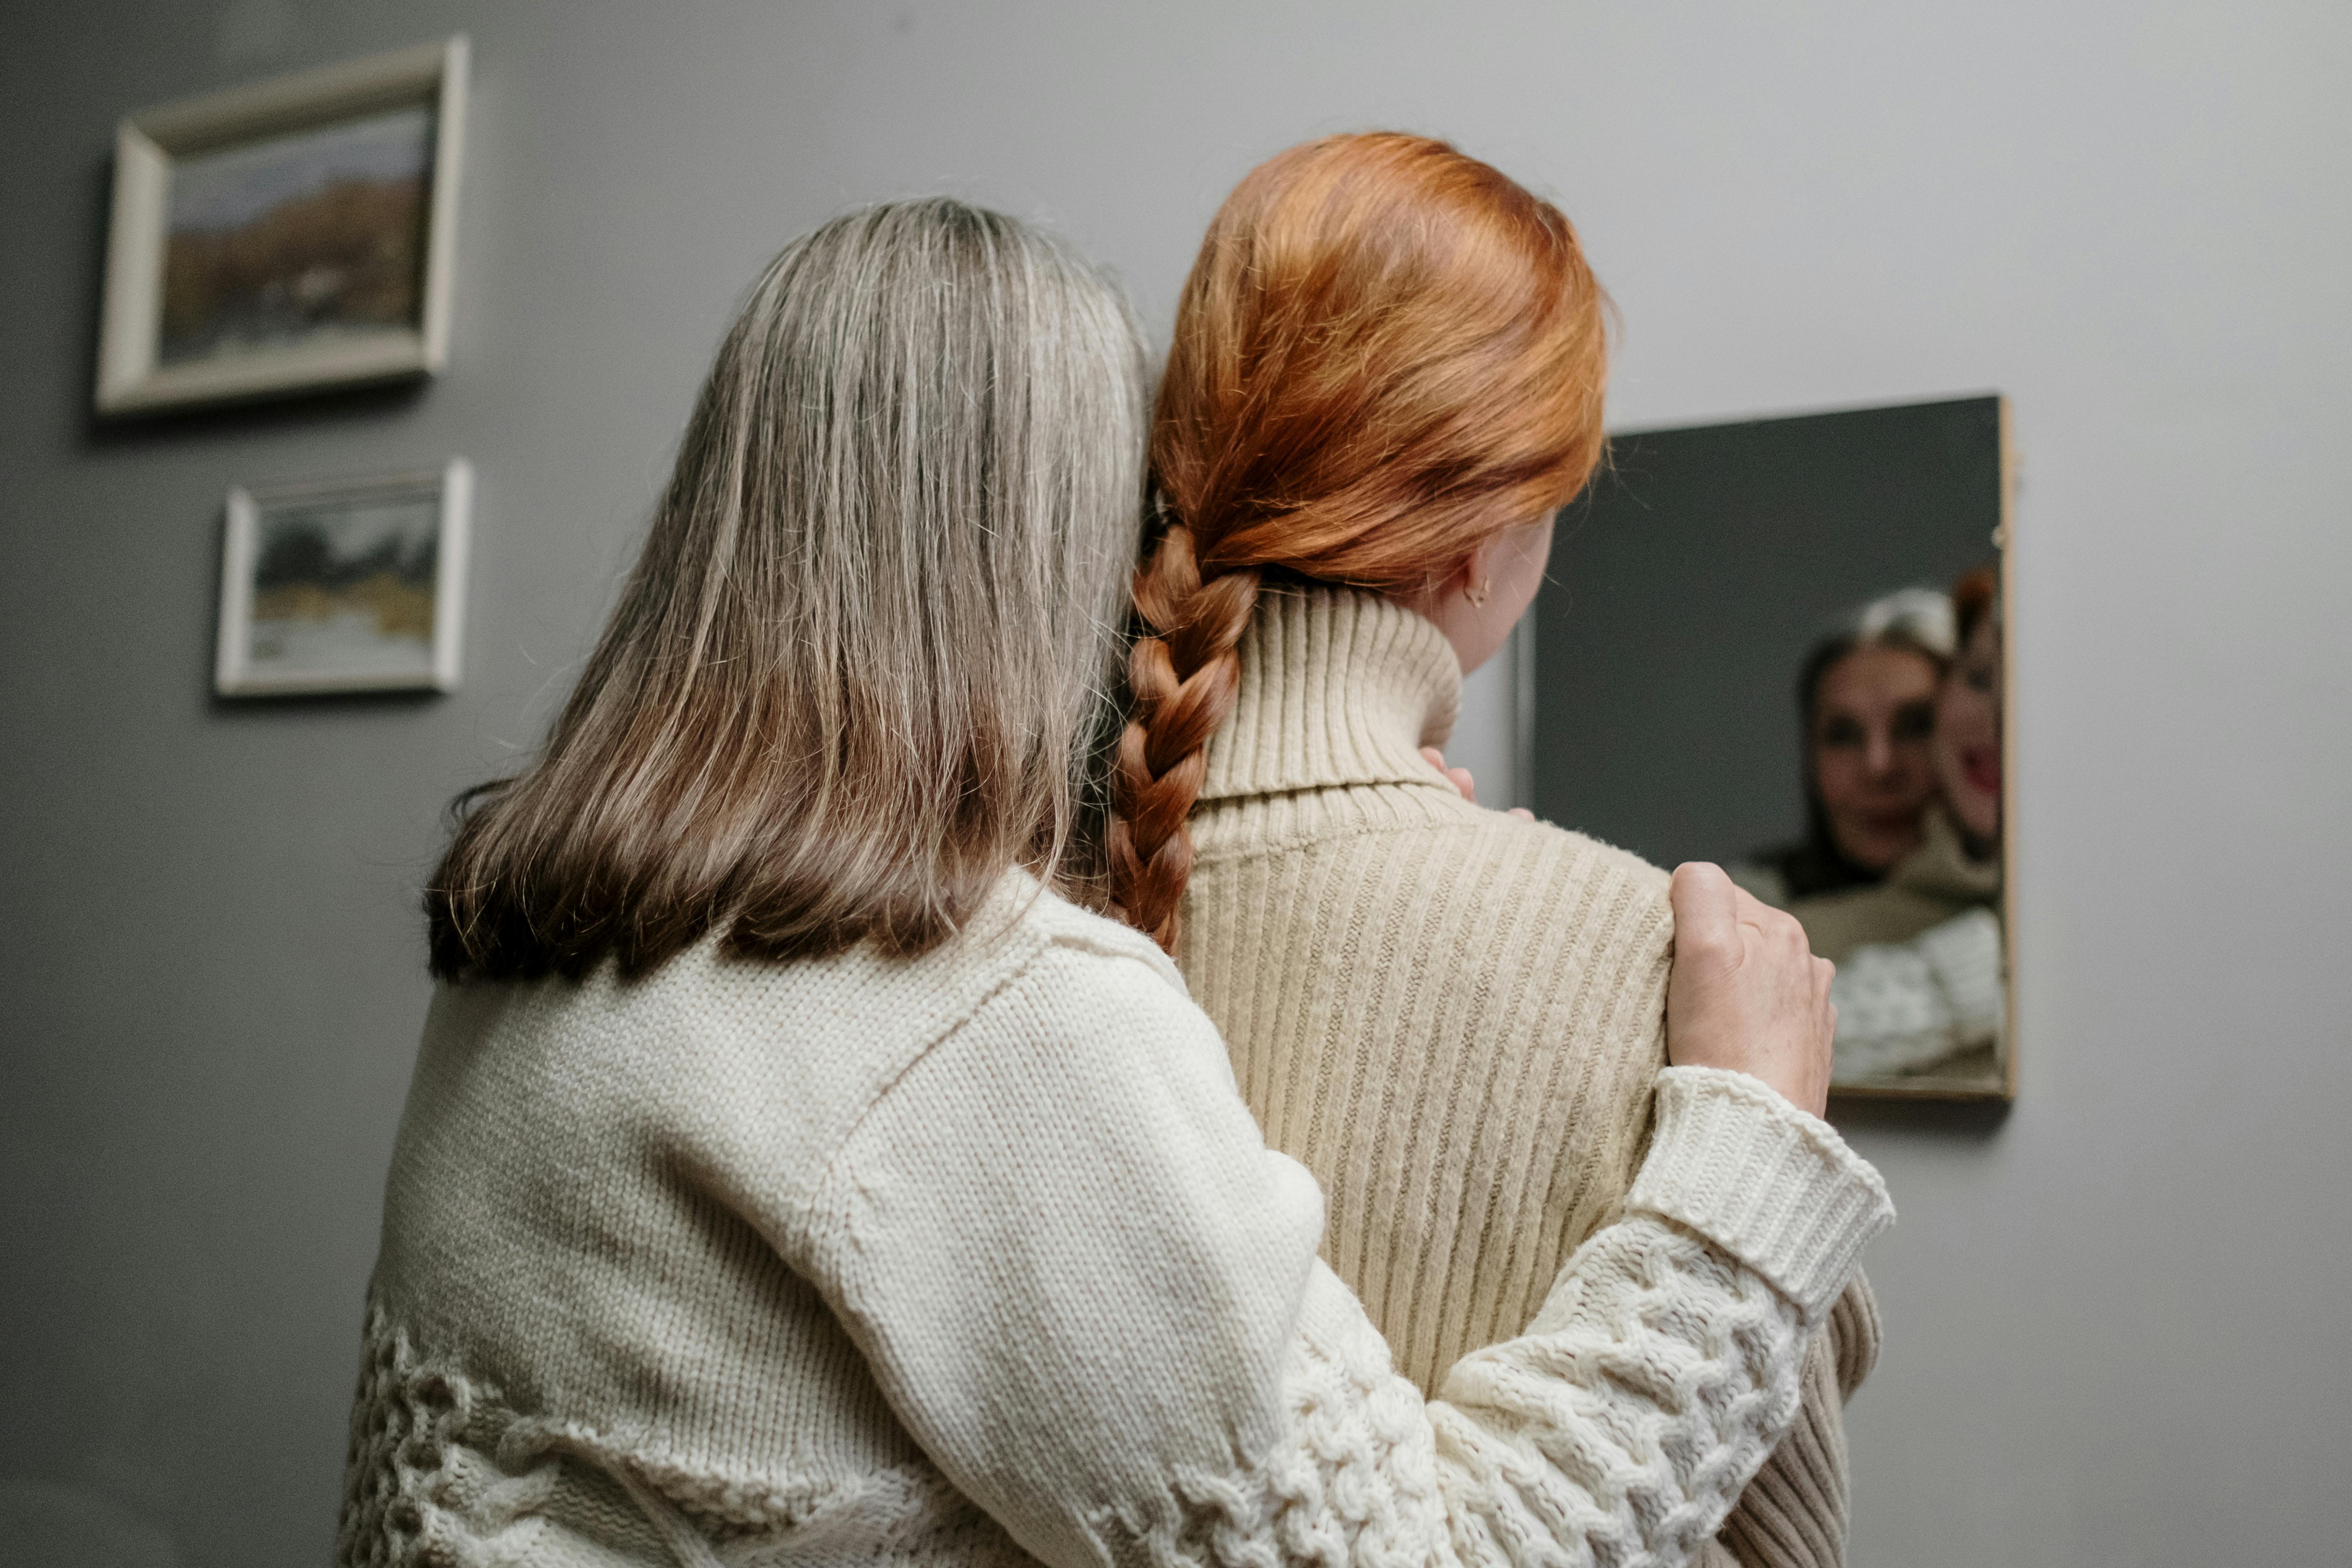 A young woman and senior woman looking into the mirror | Source: Pexels